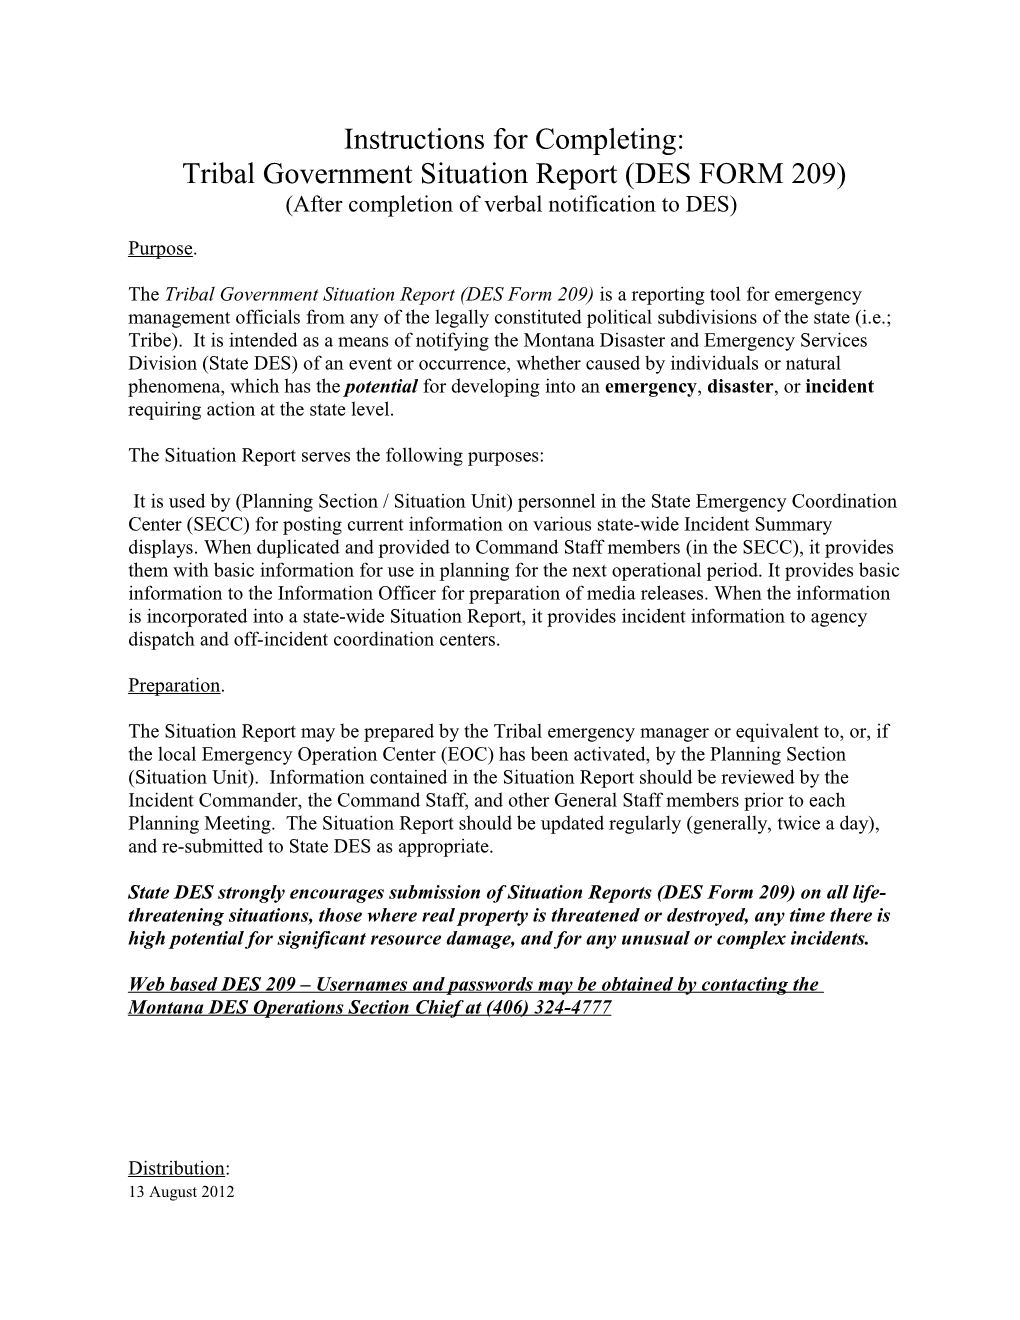 Instructions for Completing:Tribal Government Situation Report (Des Form 209)